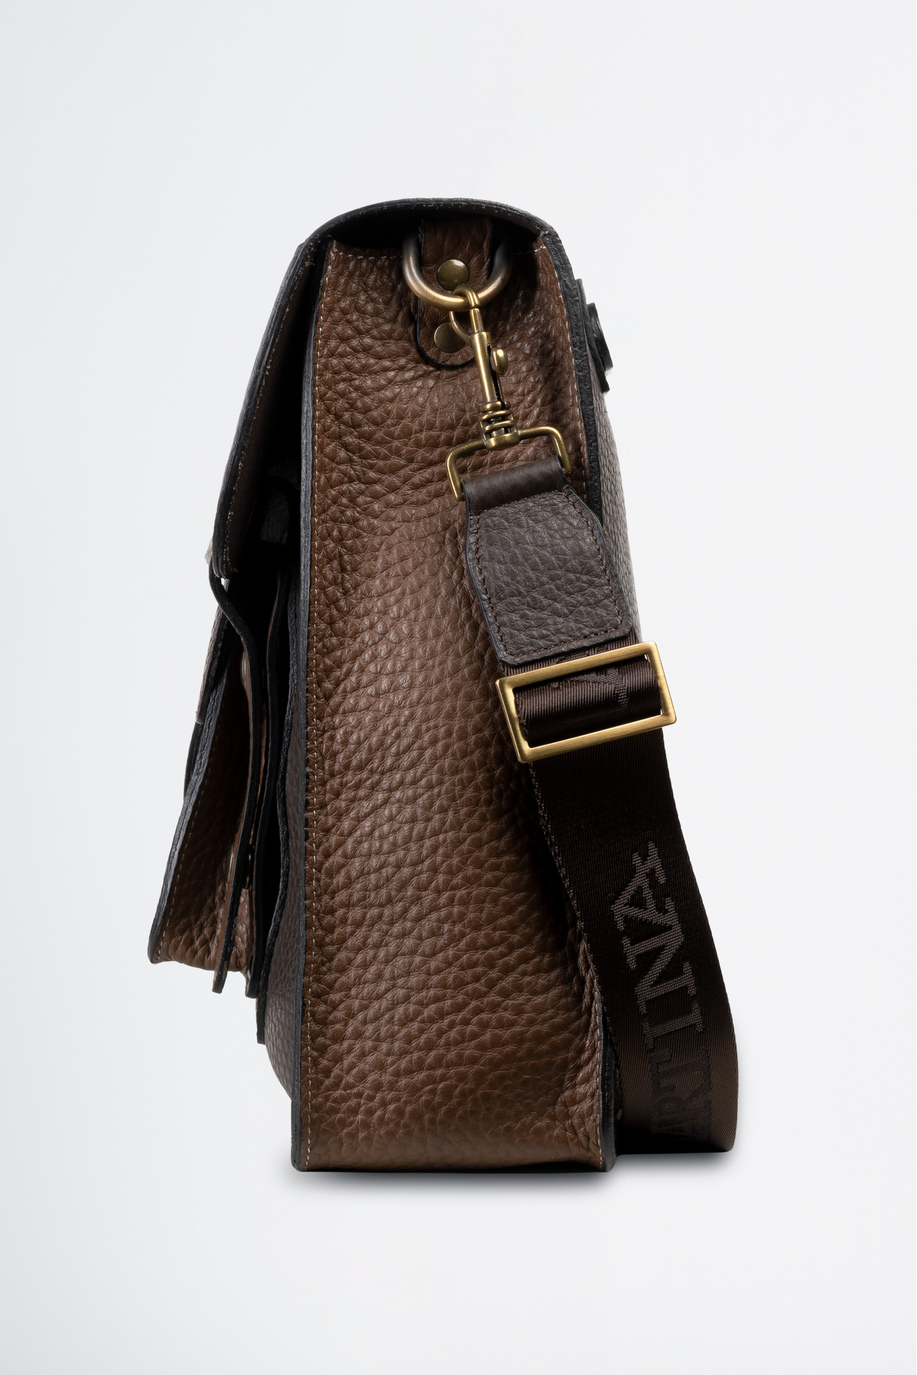 Briefcase bag in leather - Bags | La Martina - Official Online Shop